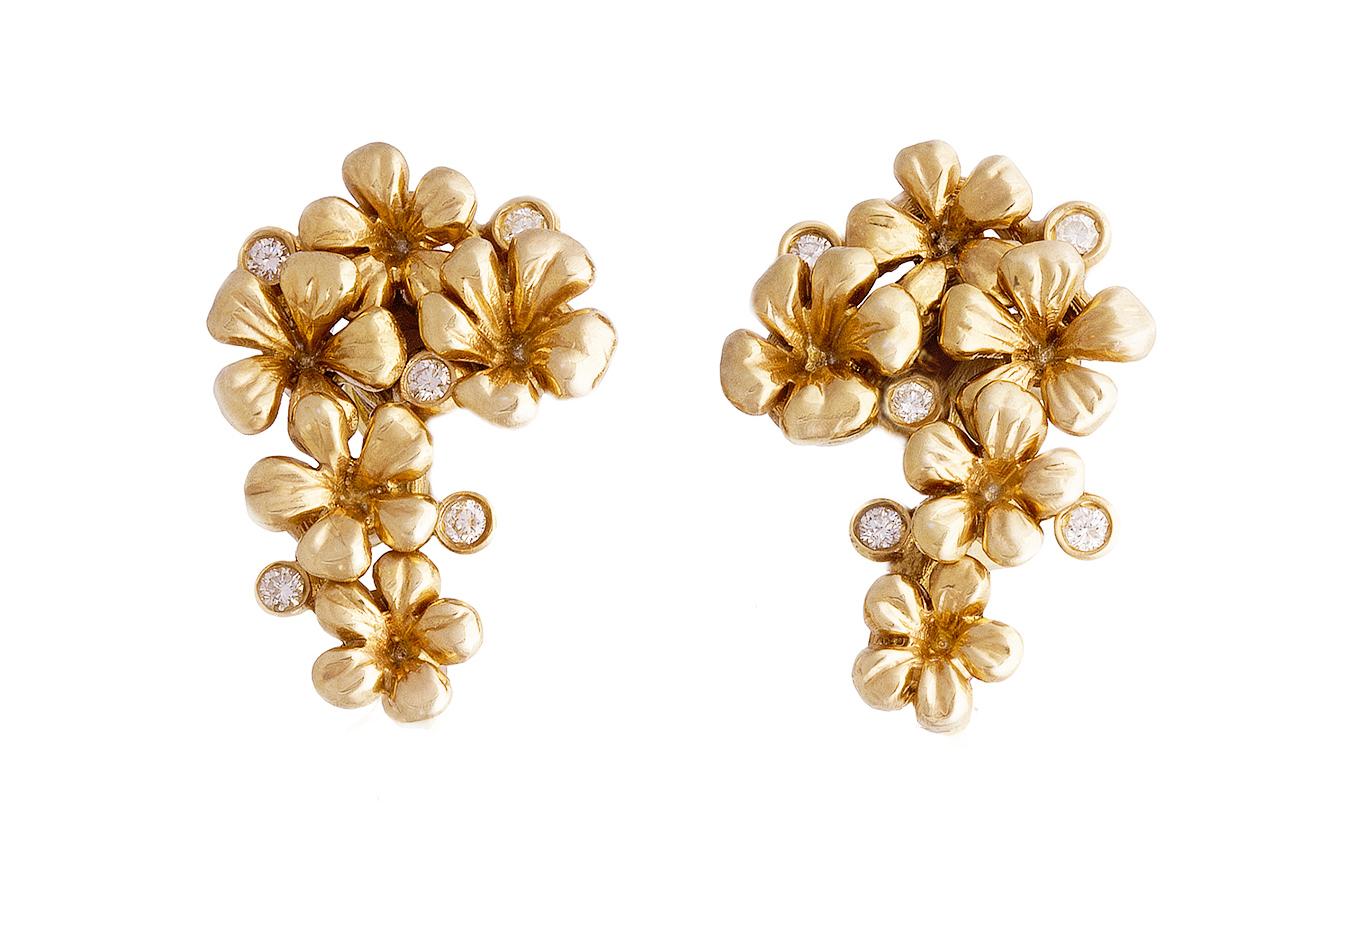 These Plum Blossom cocktail earrings in 18 karat yellow gold are encrusted with 10 round diamonds and were featured in a Vogue UA review. They were also chosen for the 64th Berlinale Film Festival red carpet by the German actress Anne Ratte-Polle.